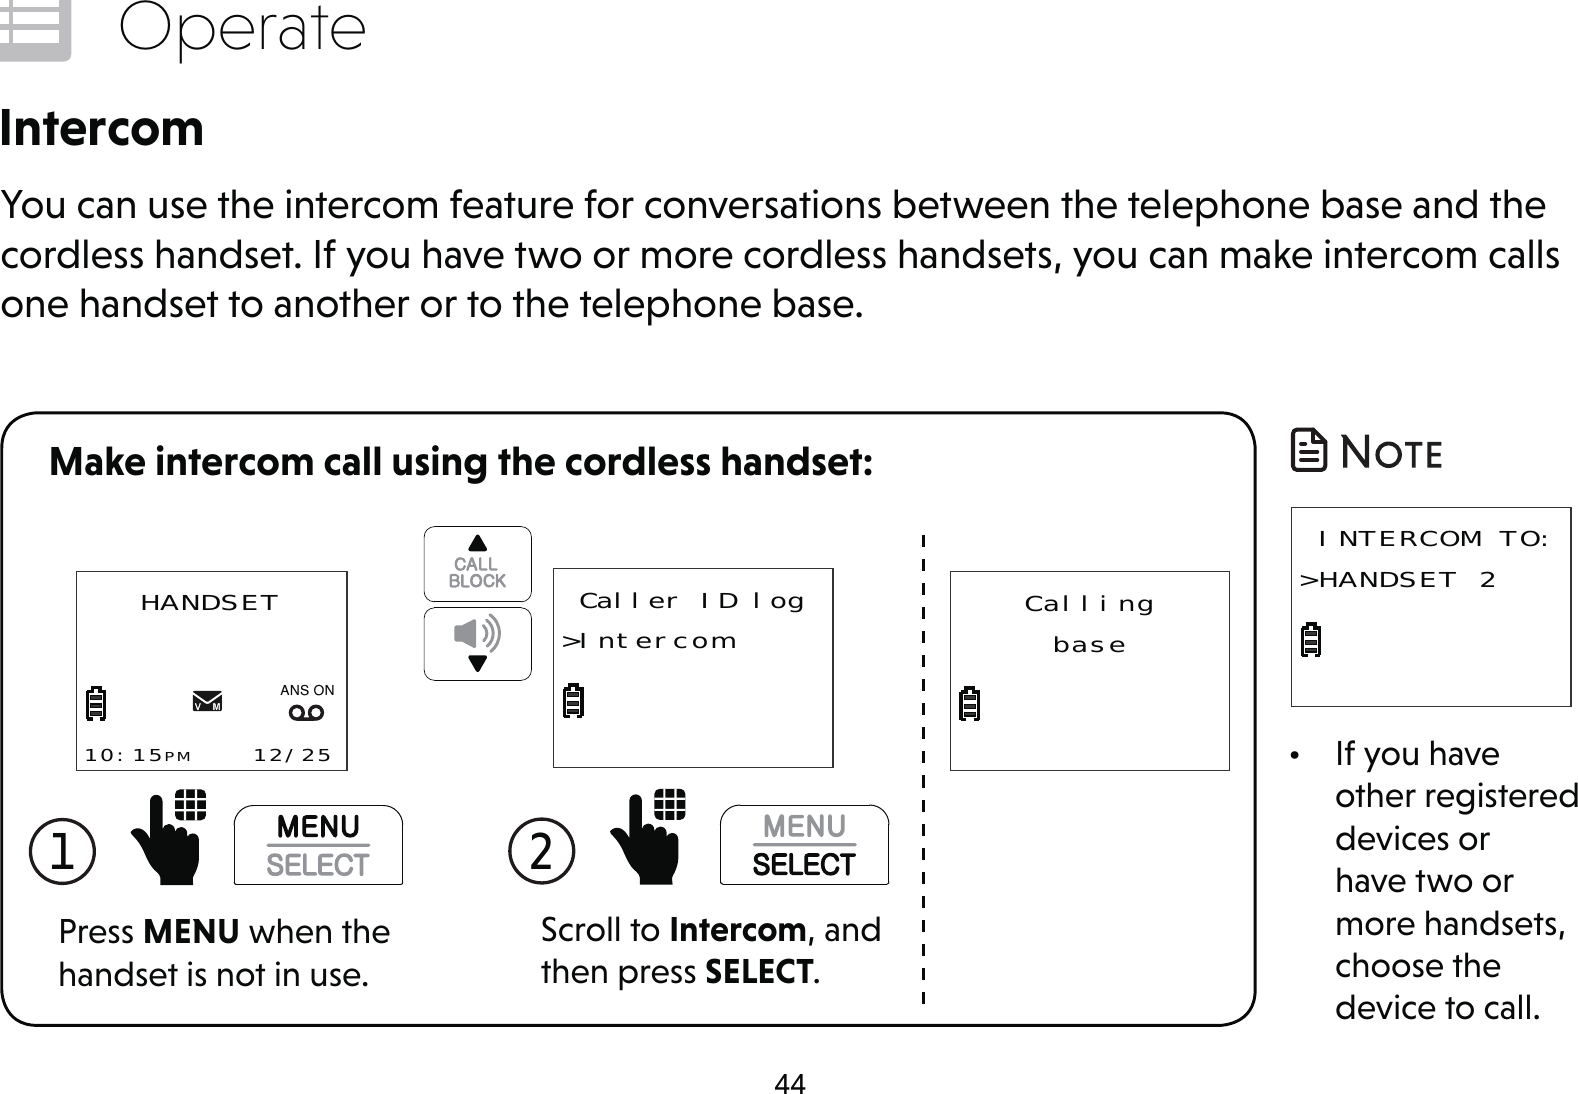 44OperateIntercomYou can use the intercom feature for conversations between the telephone base and the cordless handset. If you have two or more cordless handsets, you can make intercom calls one handset to another or to the telephone base.1  Press MENU when the handset is not in use.HANDSET10:15PM    12/25$1621CallingbaseScroll to Intercom, and then press SELECT.2  Caller ID log&gt;IntercomMake intercom call using the cordless handset:•  If you have other registered devices or have two or more handsets, choose the device to call. INTERCOM TO:&gt;HANDSET 2 